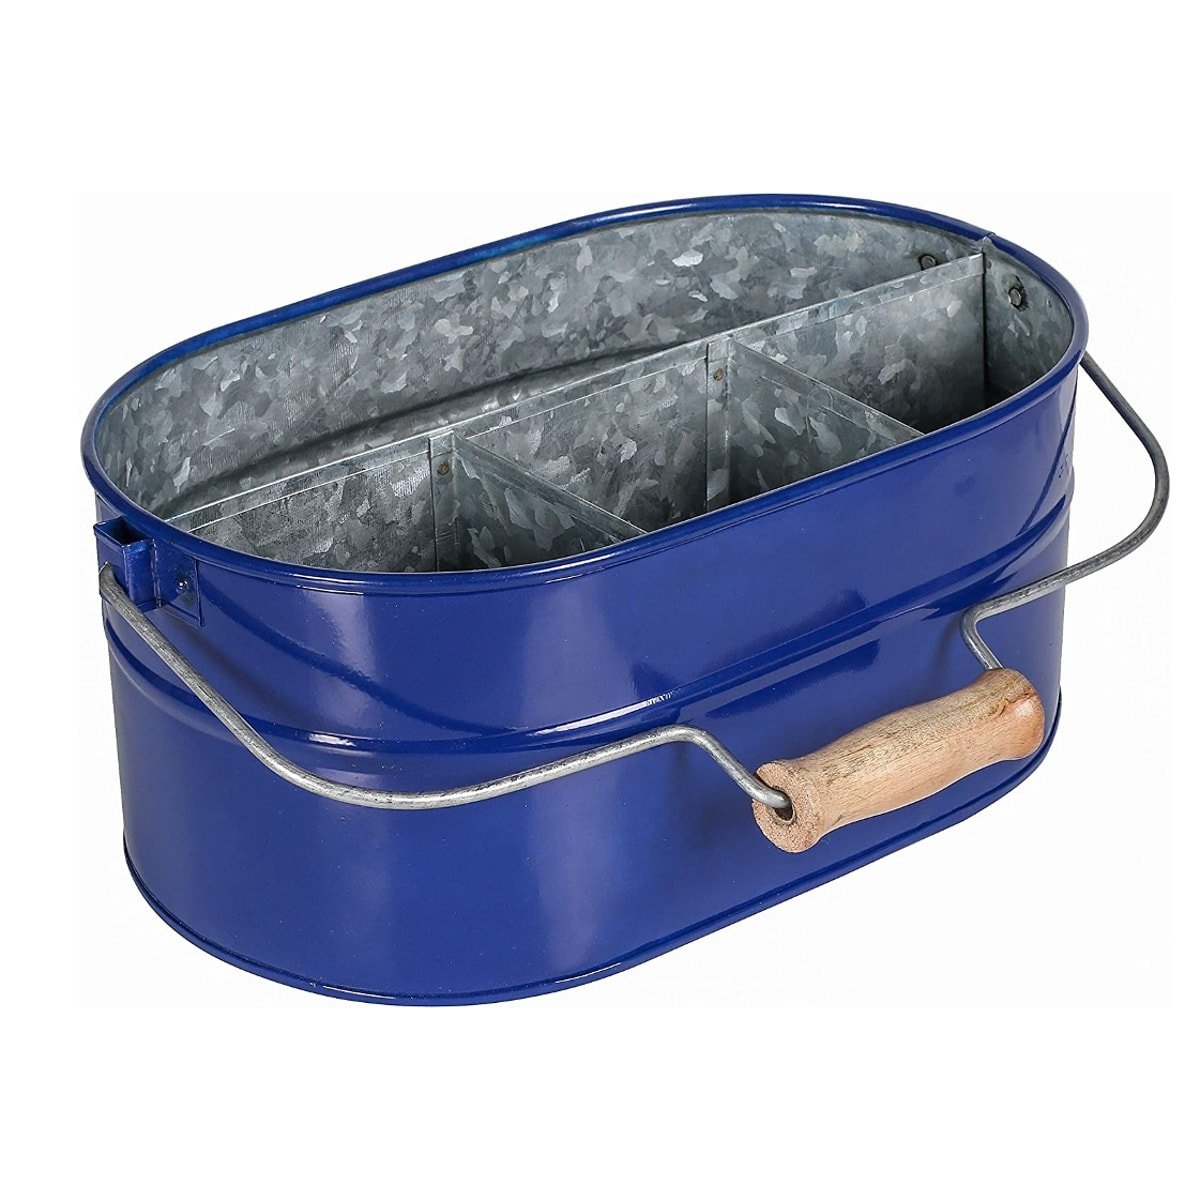 A stainless steel blue caddy with handle used to hold utensils and plates.